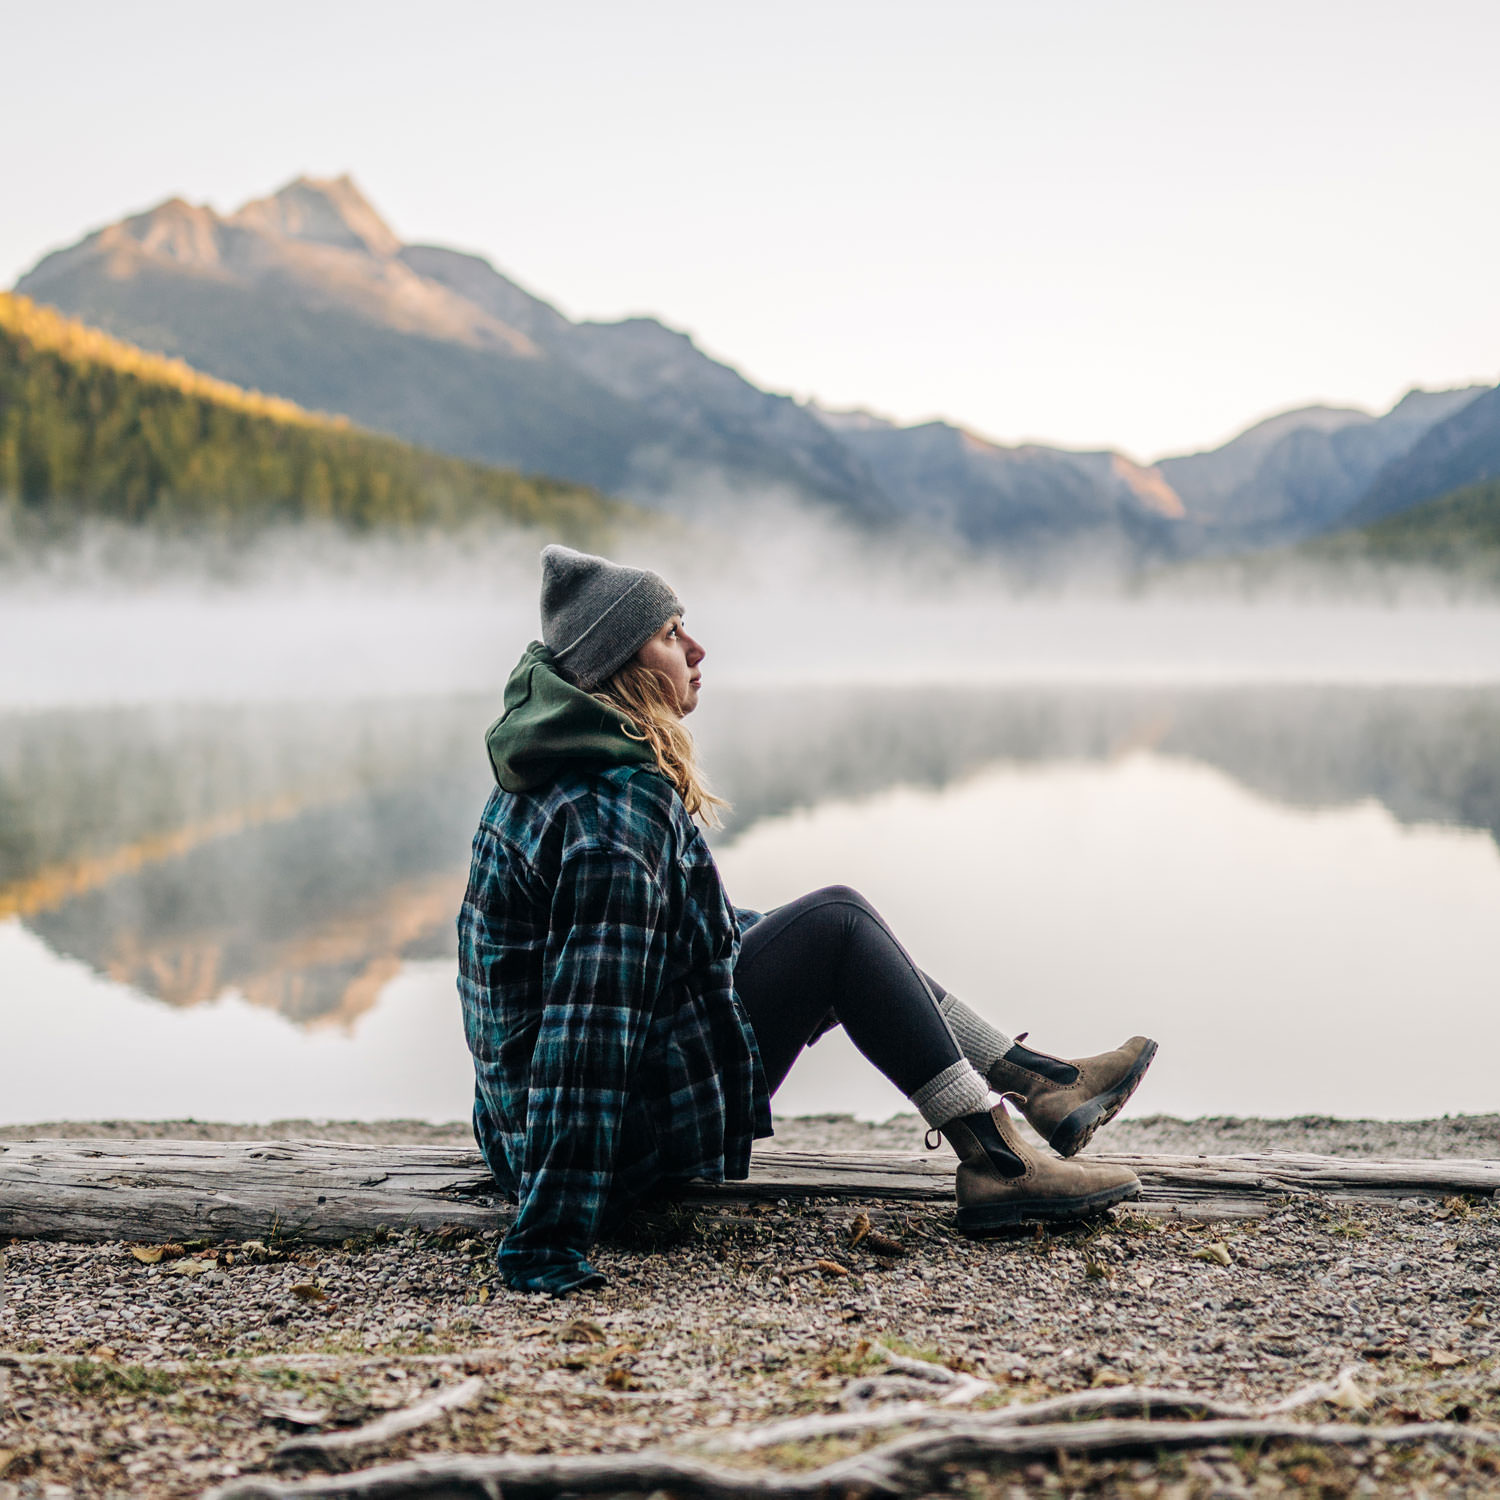 Jessica sitting on a log at sunrise at Bowman Lake in Glacier National Park.